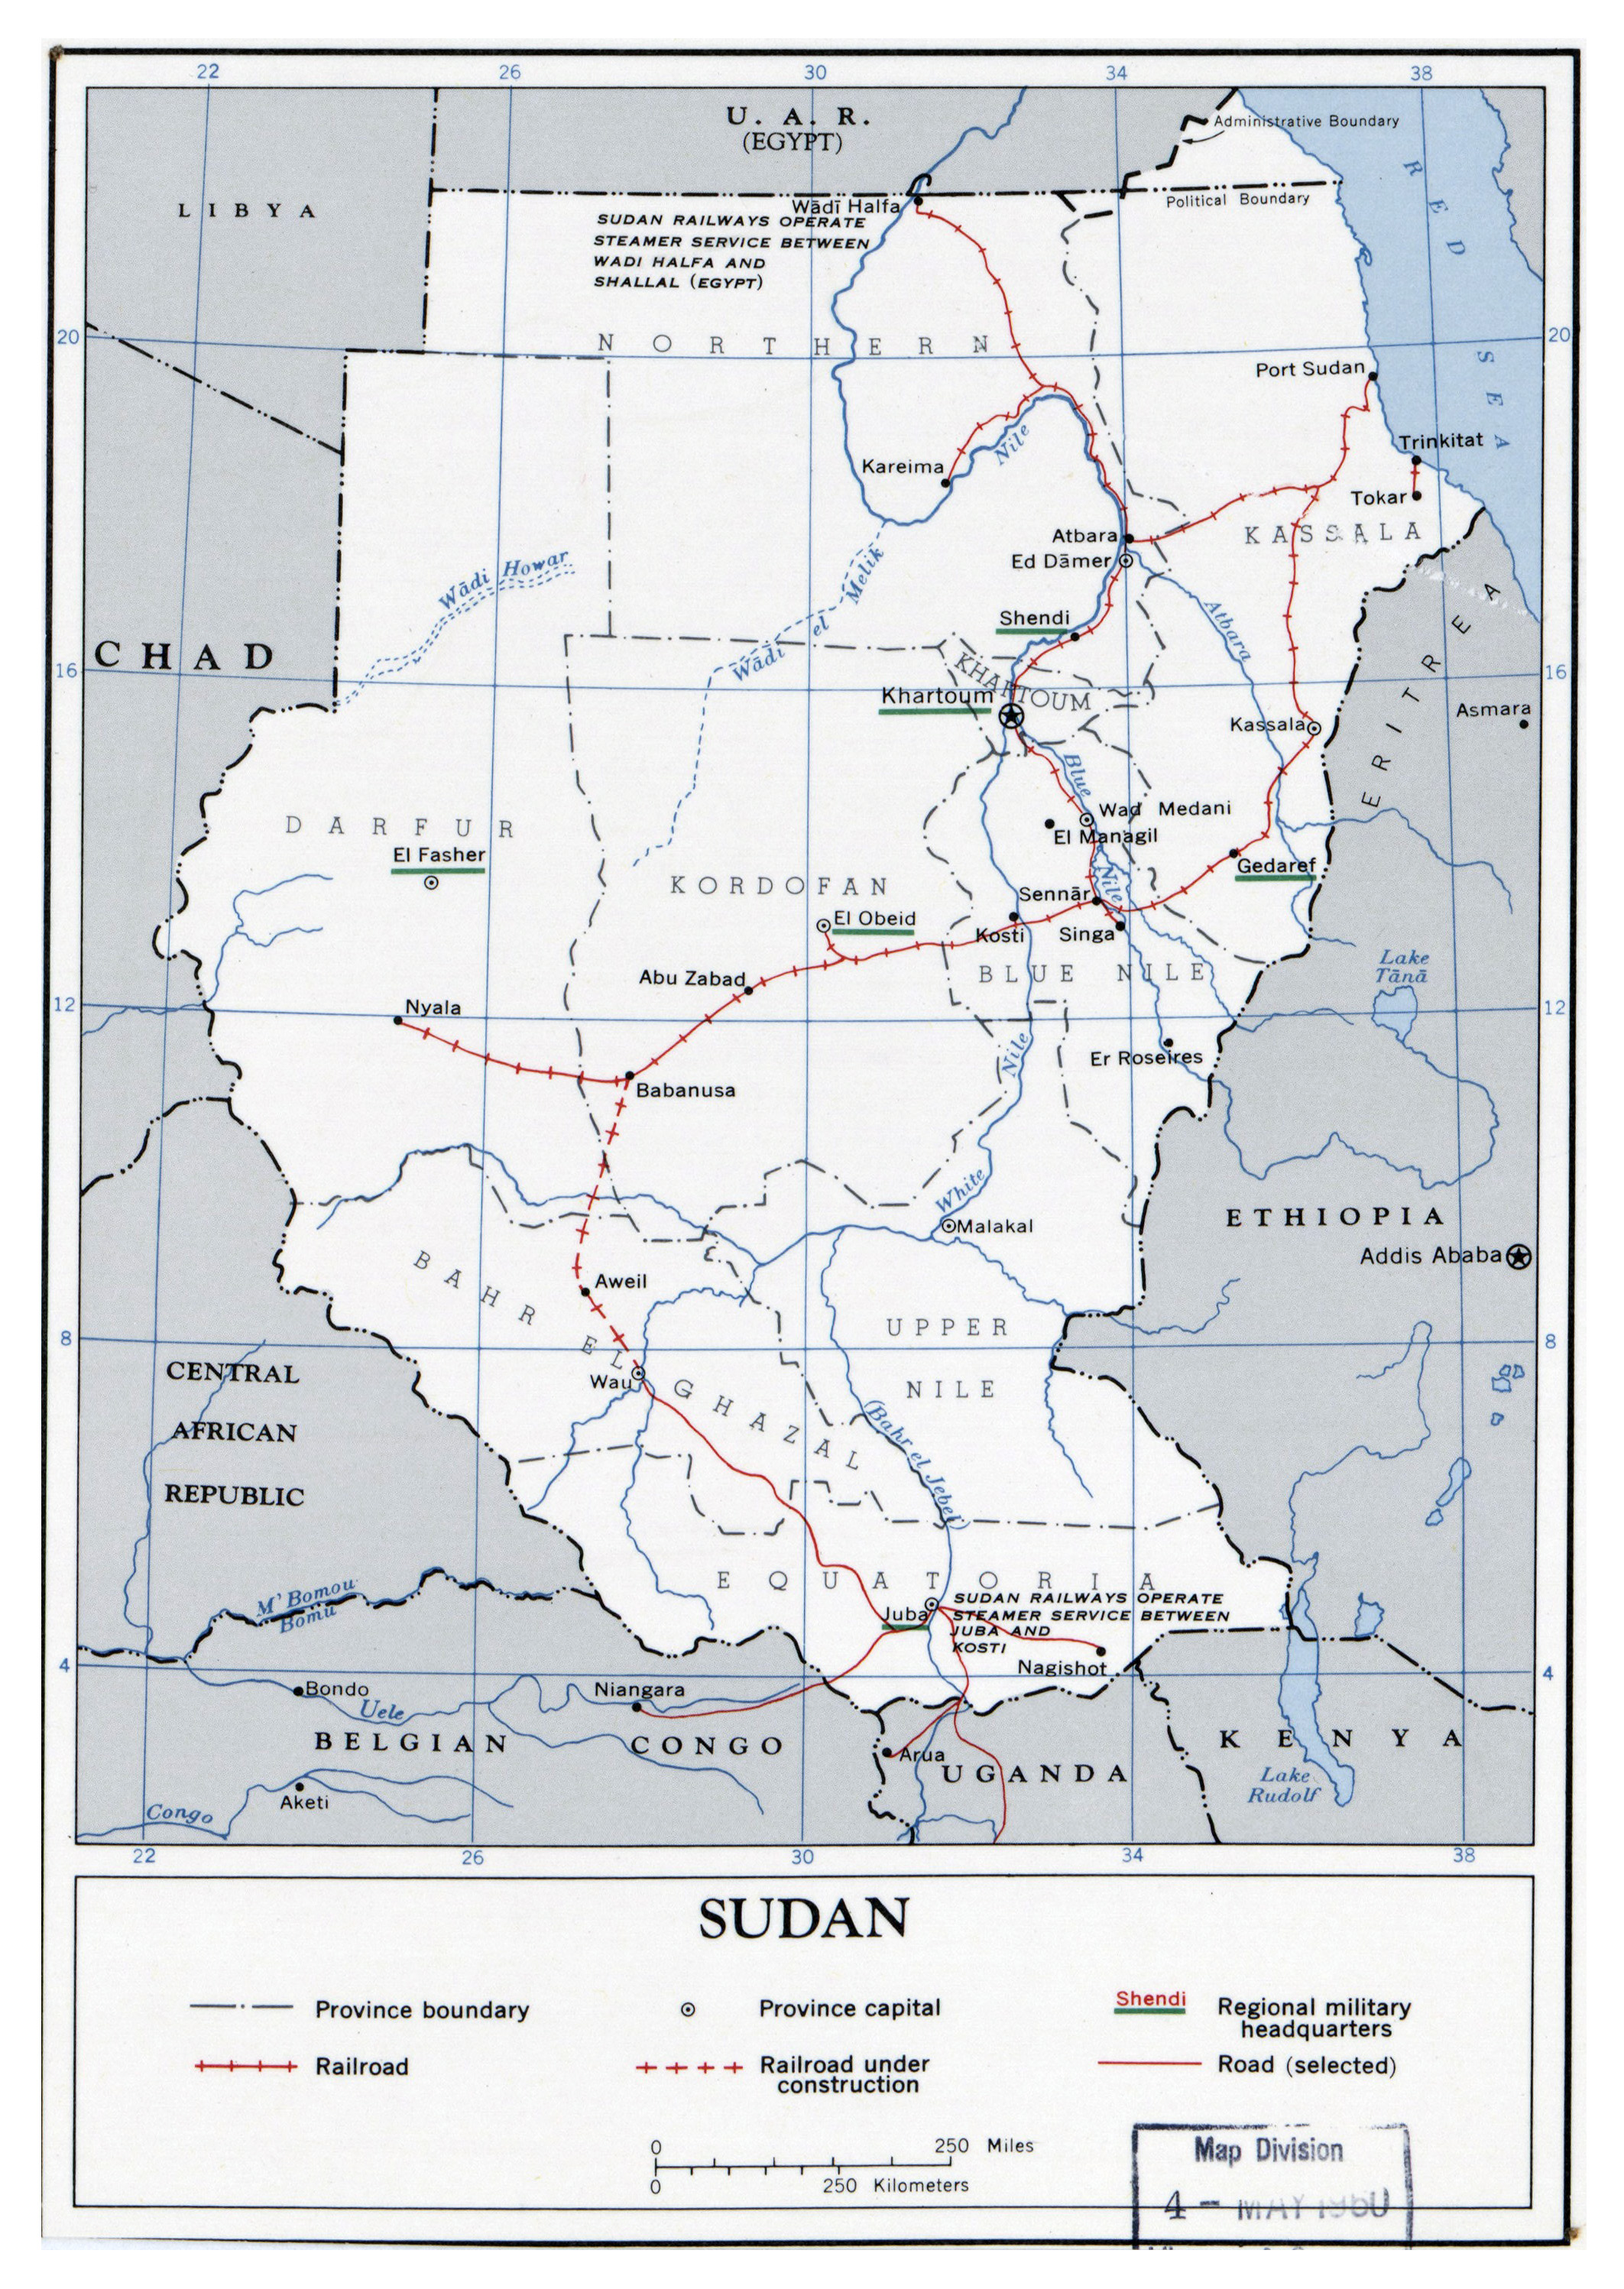 Large Scale Detailed Political Map Of Sudan With Relief Roads Images